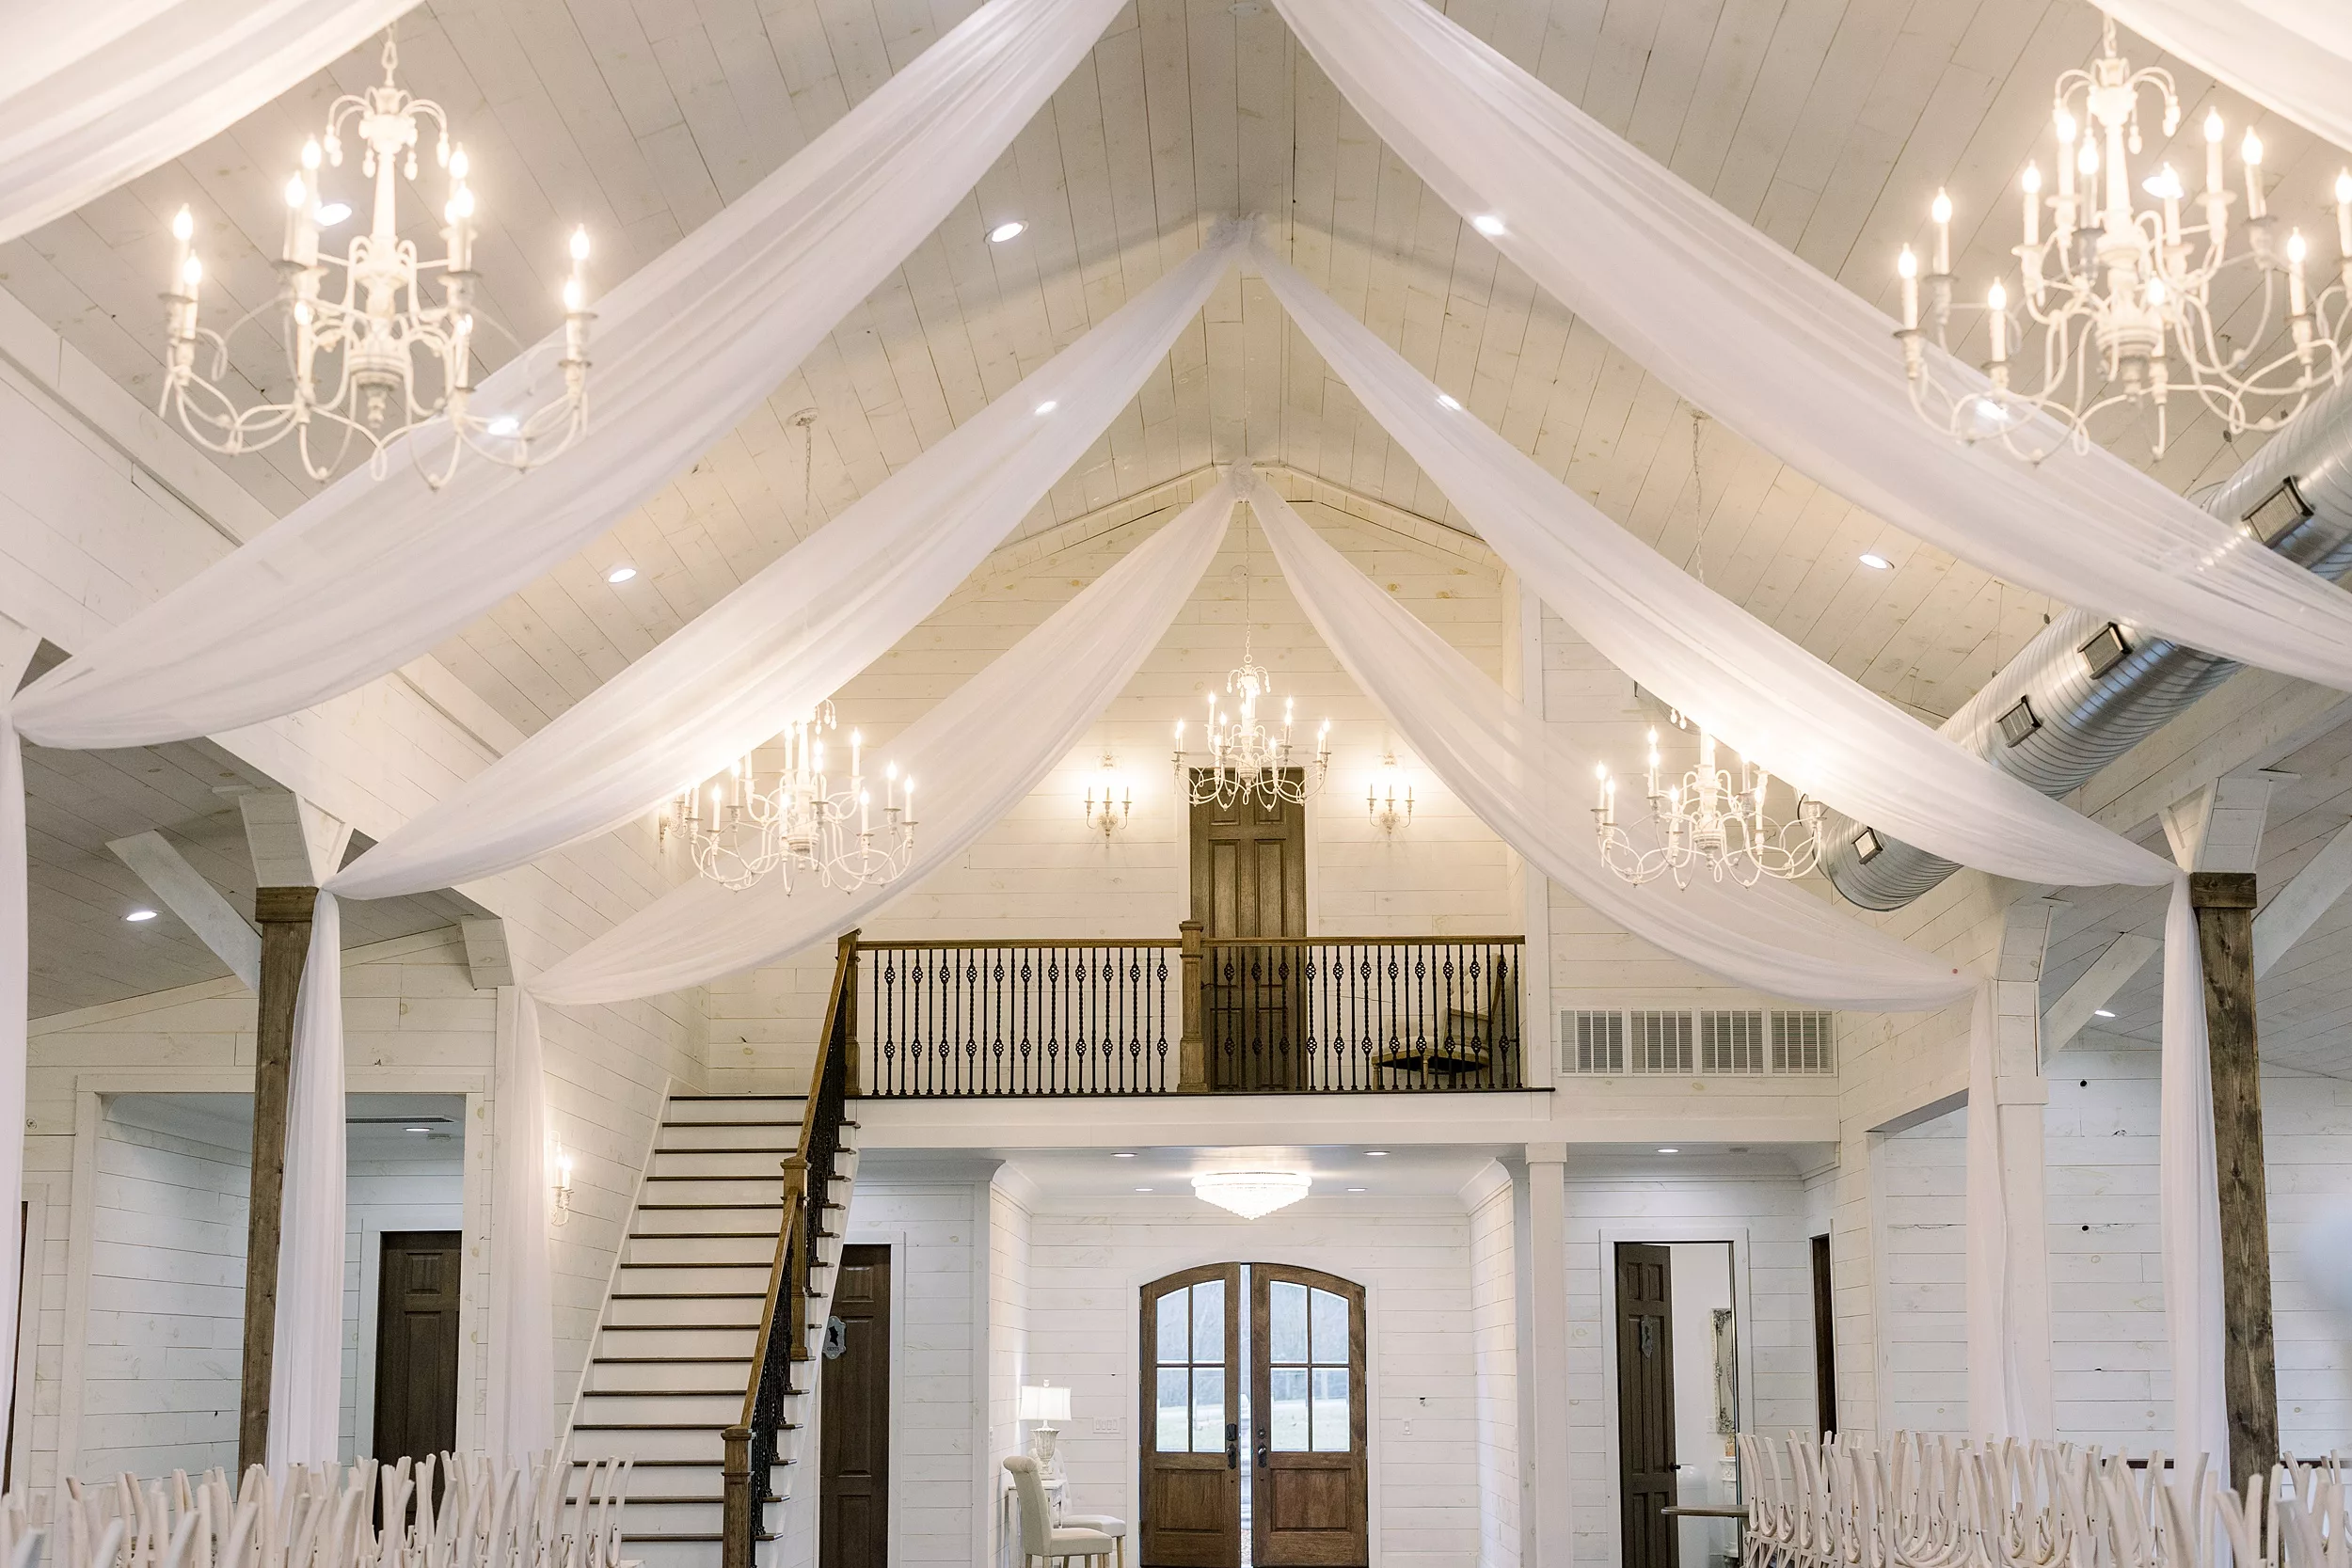 Chandeliers and white drapes hung in a wedding reception venue